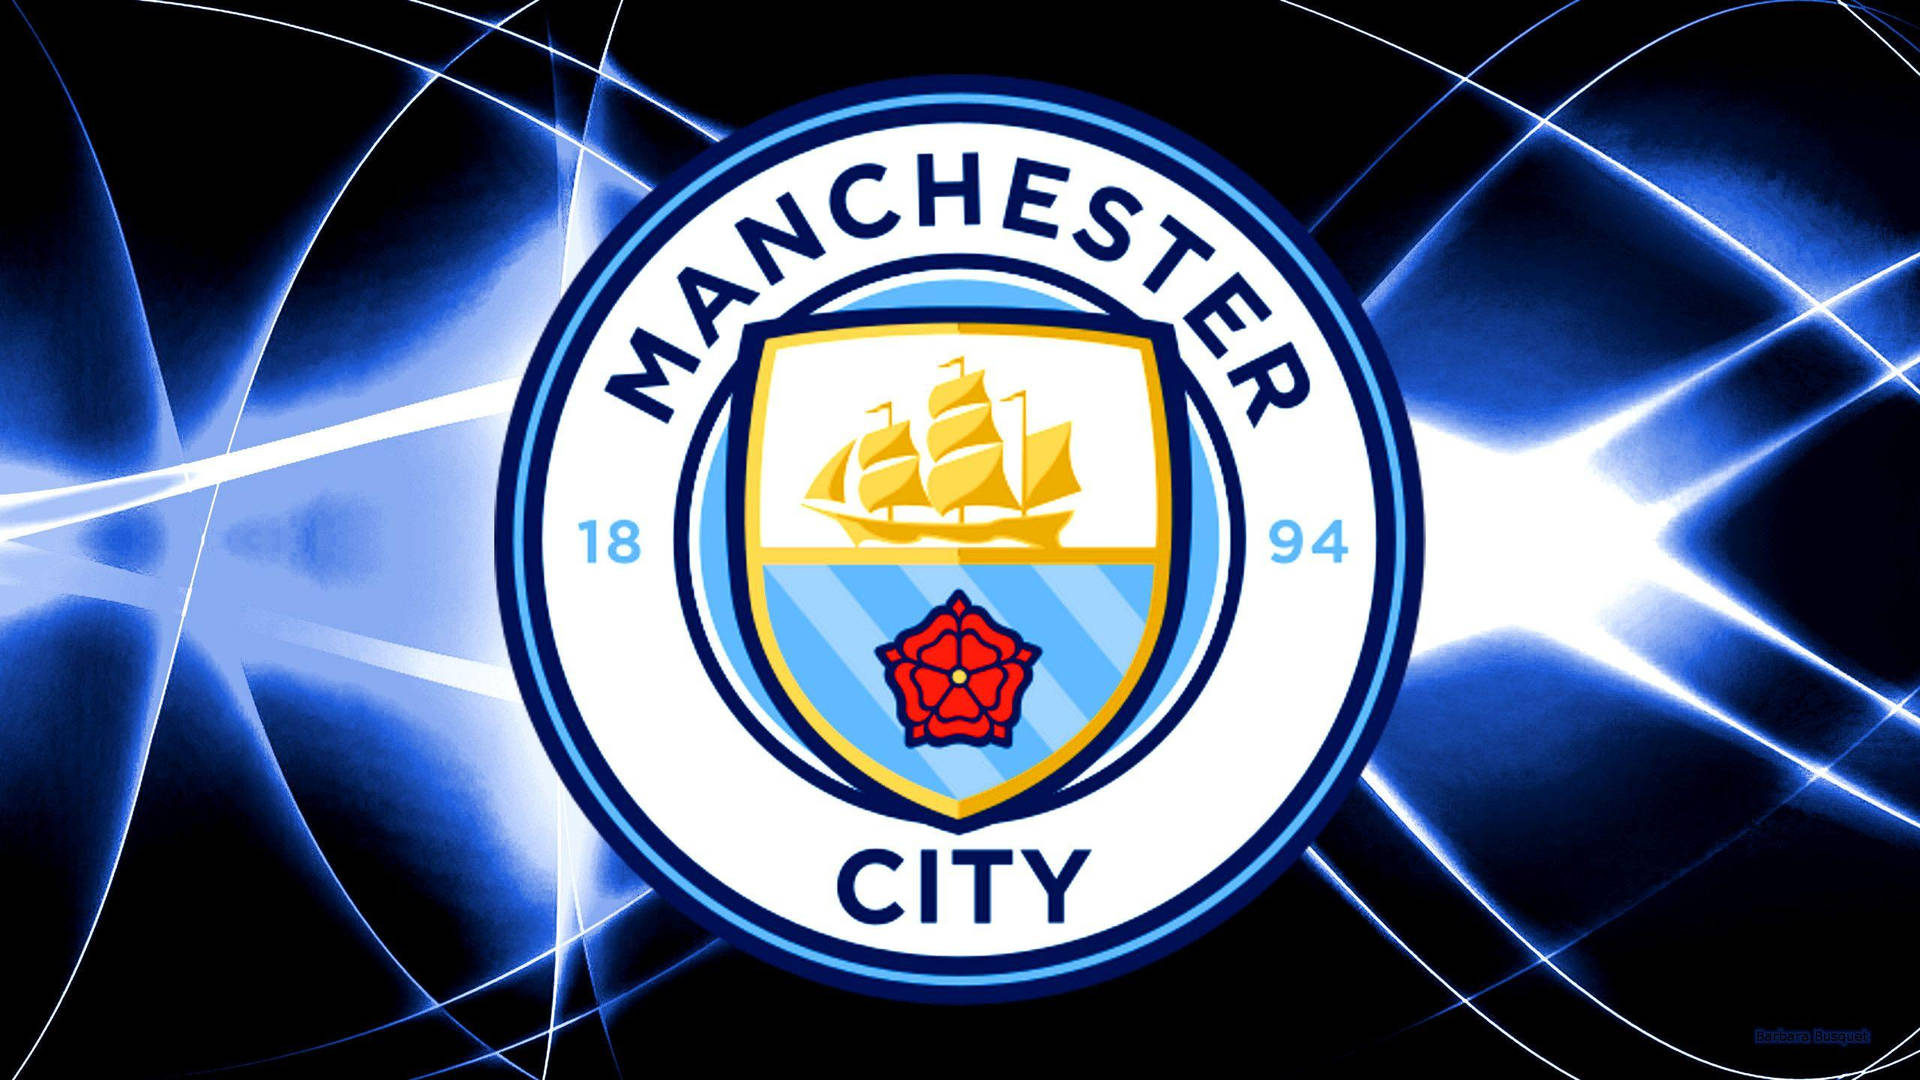 Black, Blue And White Manchester City Fc Background